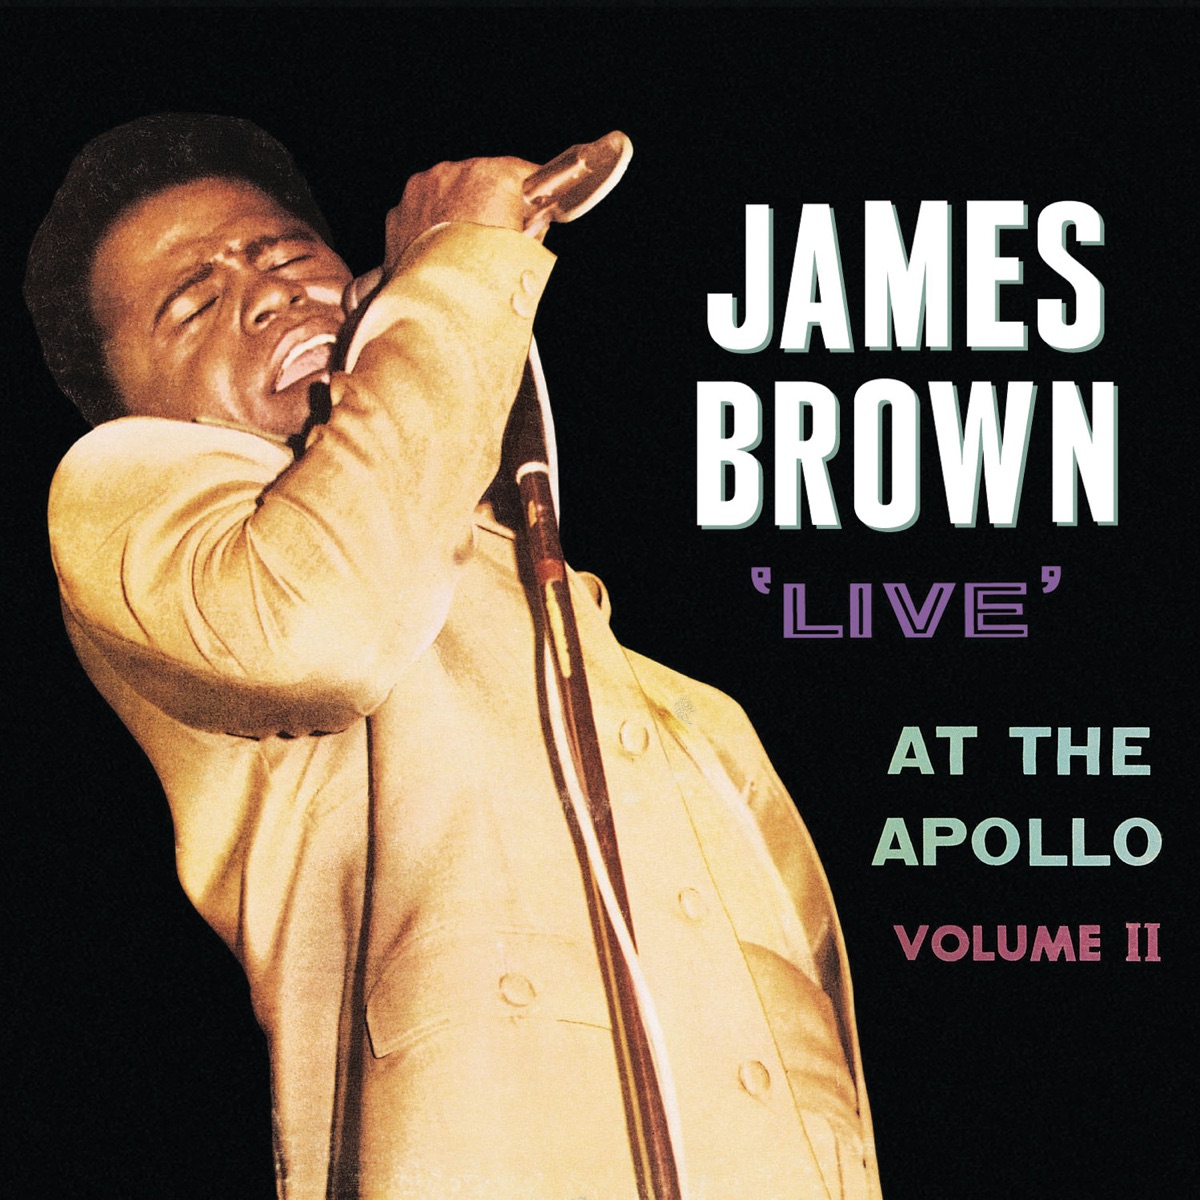 Live At the Apollo, Vol. II - Album by James Brown - Apple Music